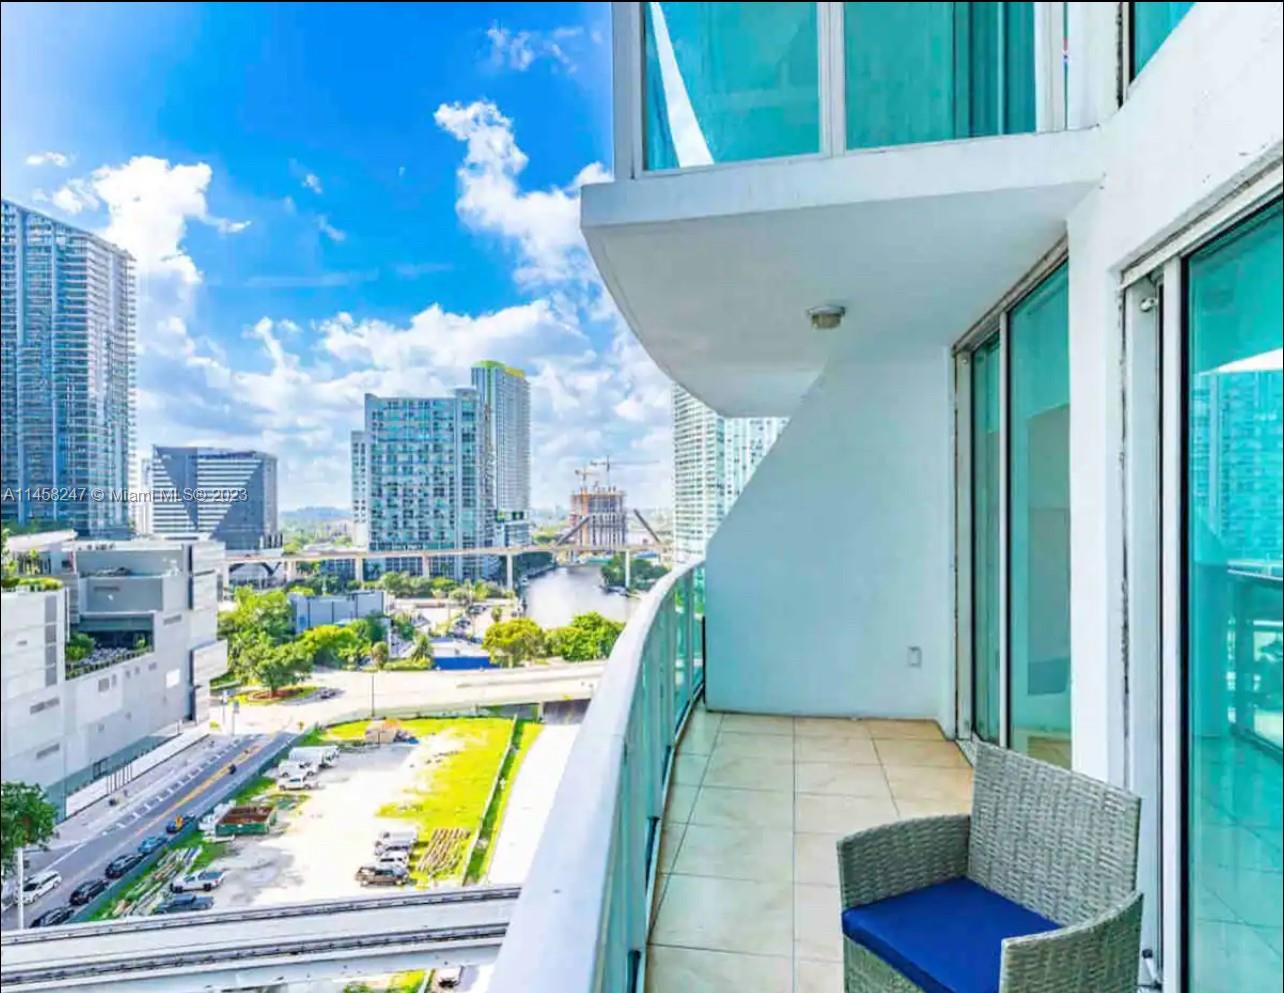 A MUST SEE! Beautiful ‘Brickell on the River’ 2-story loft w/ double-height ceilings 2 BEDROOM 2 BATHROOM, 1 DEN, 2 BALCONIES (up/down), Lots of STORAGE, Electric shades in the second level. Live in the heart of the Brickell Financial & Innovation District. Urban vibe, open-loft plan. Full service amenities with gym, spa, 2 pools, river frontwalk way, 24-hour Front Desk reception & Valet Parking, beautiful modern lobby and much more! Ideal for investors w/ potential for SHORT TERM rentals . Pet friendly building. Comes w/ 1 assigned parking space.
Quick access to Interstate & only 10 minutes’ drive to Miami International Airport. Walking distance to Brickell City Center shopping, Metro Mover 5th Street Station, Riverside or Bayside Market Places & fine dining.